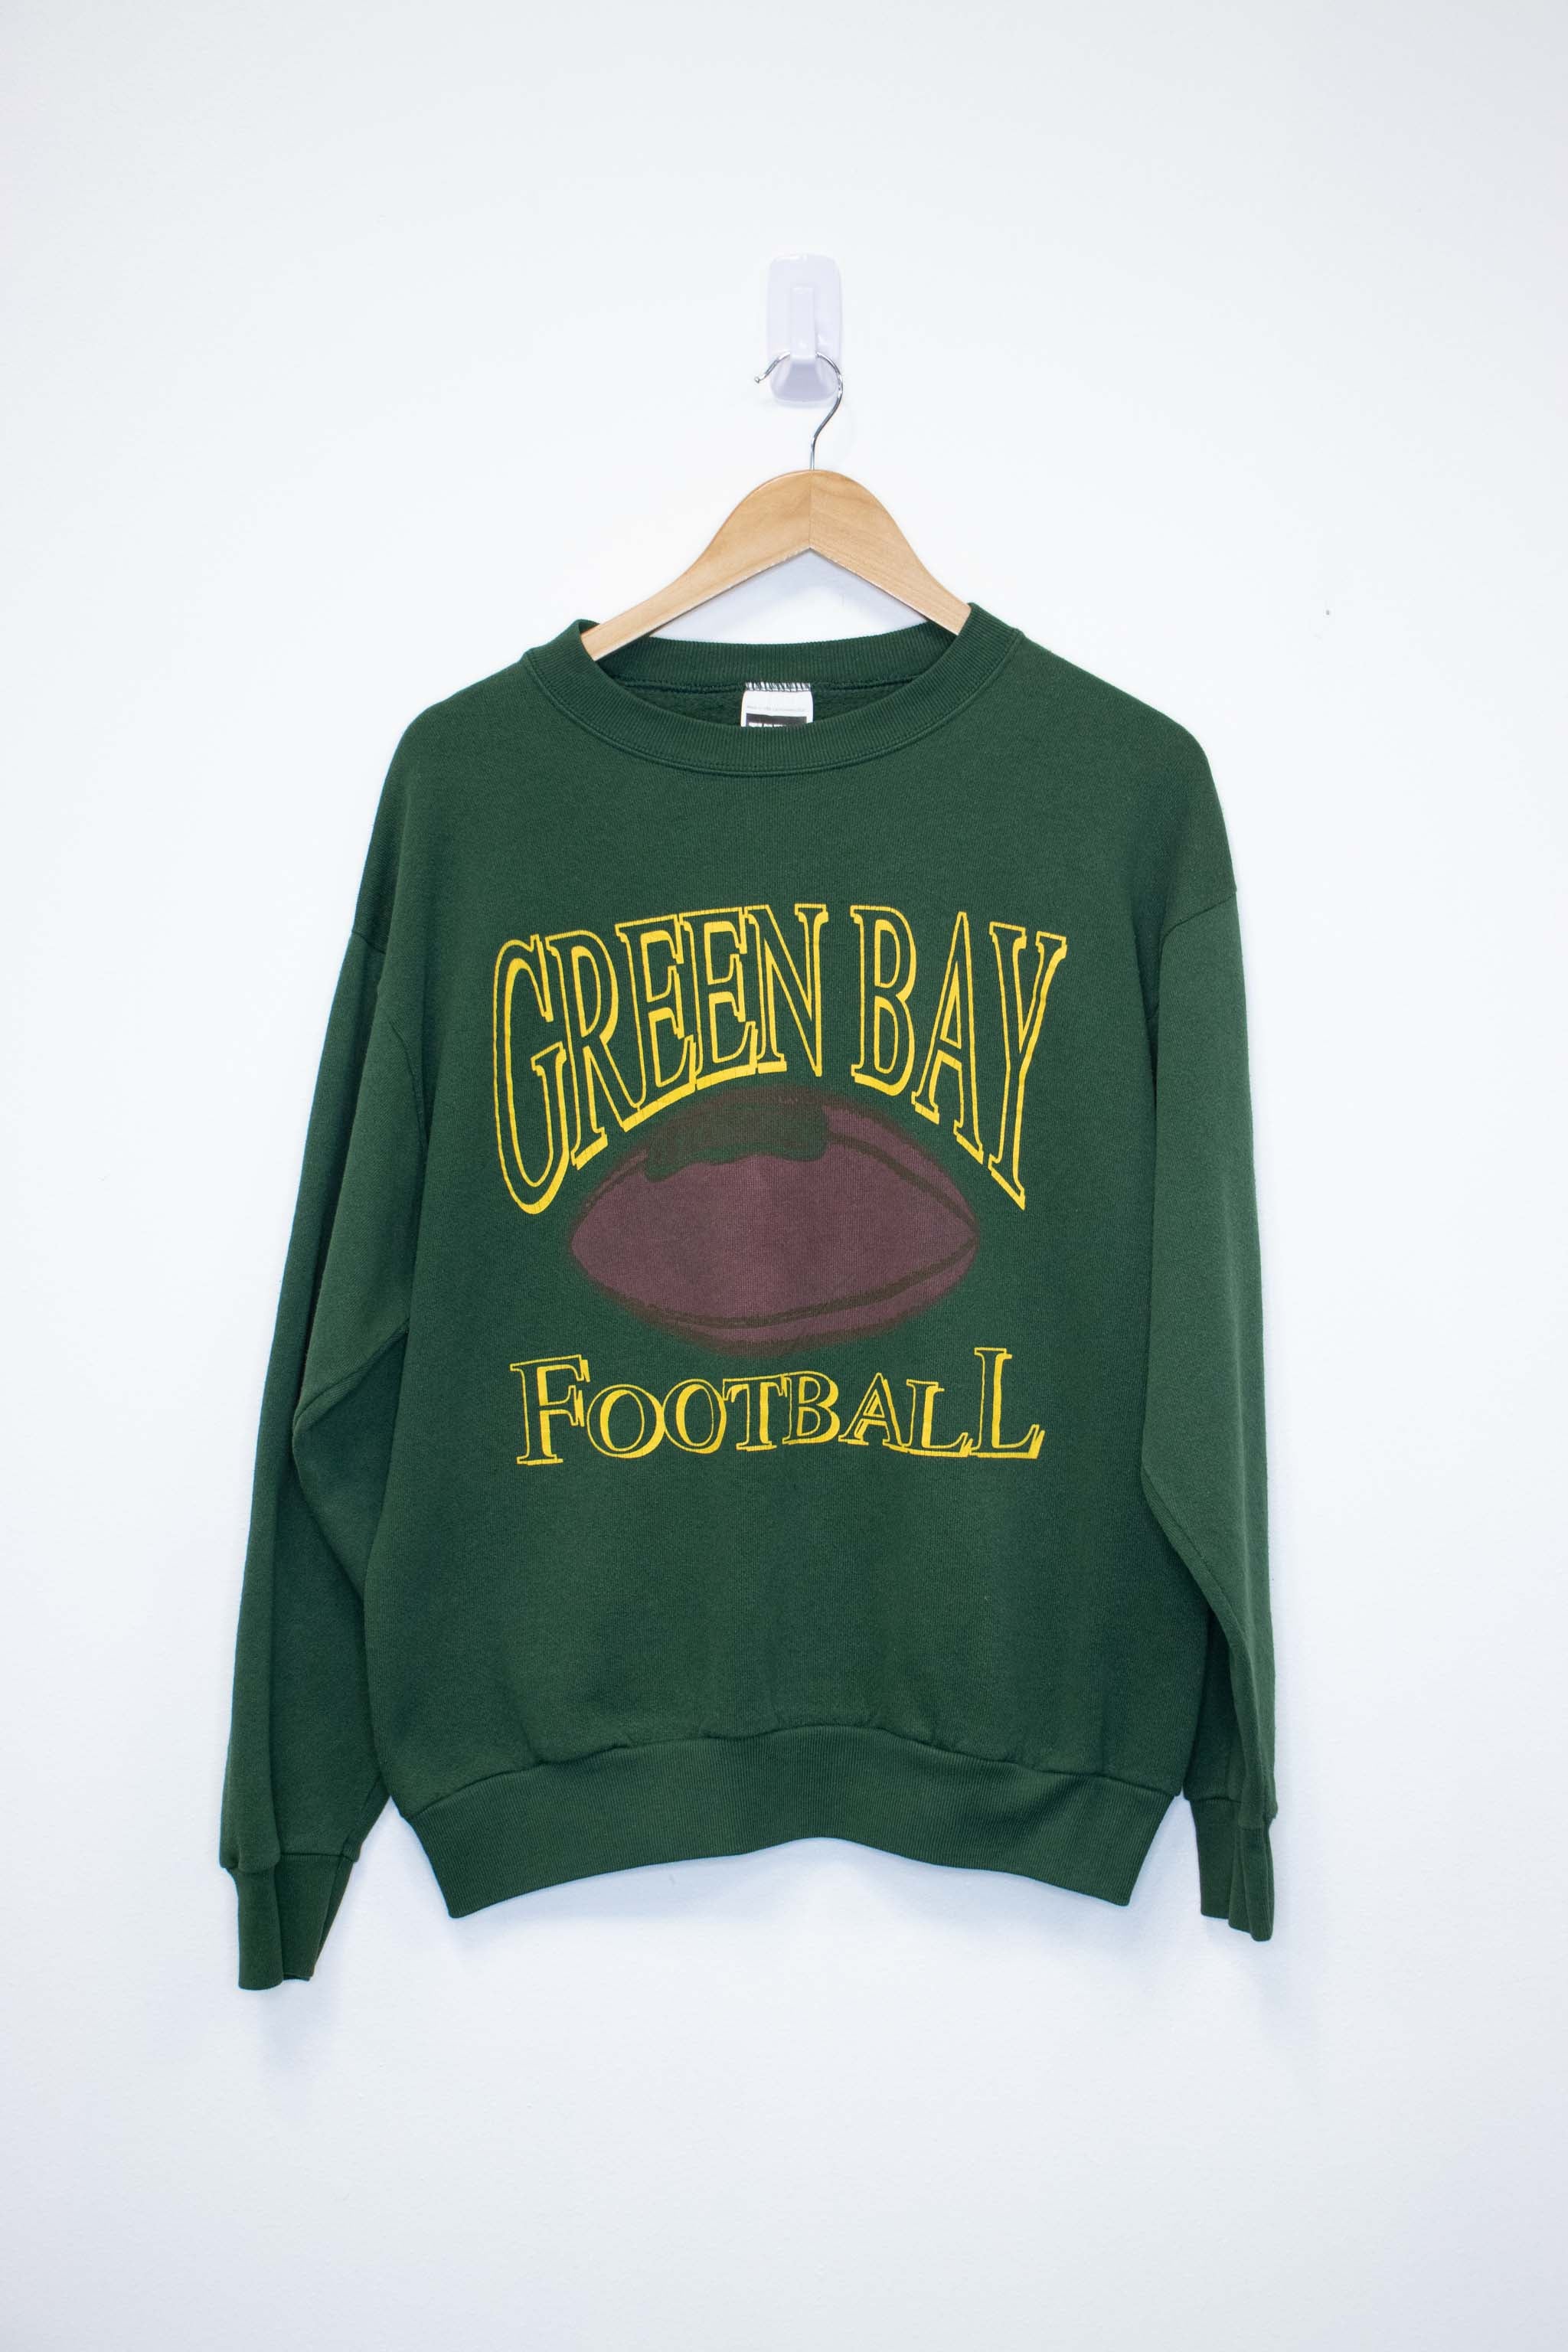 Vintage Green Bay Packers Crew